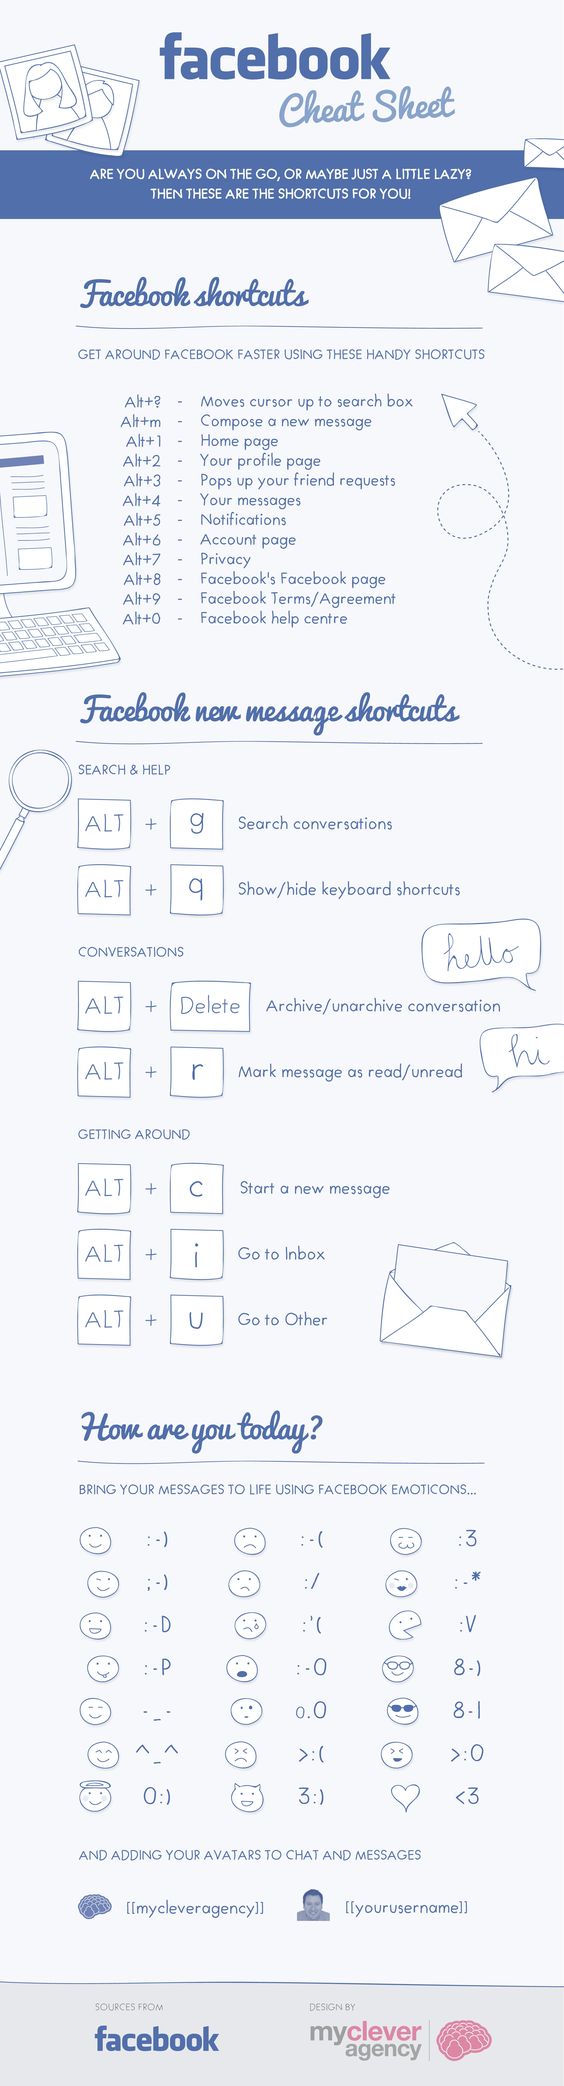 The Facebook Cheat Sheet Shows All the Keyboard Shortcuts to Use Facebook Faster